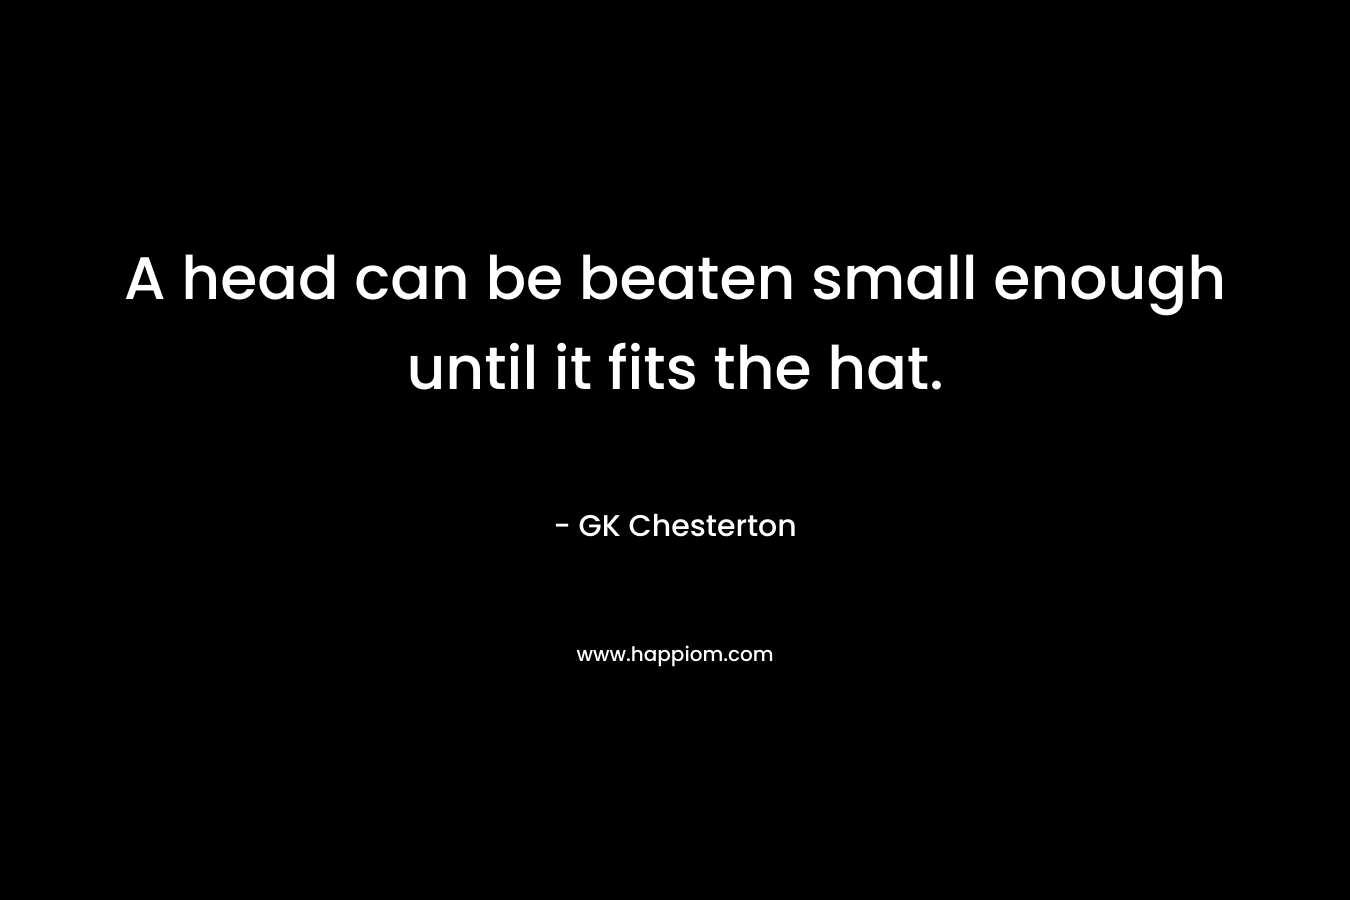 A head can be beaten small enough until it fits the hat. – GK Chesterton